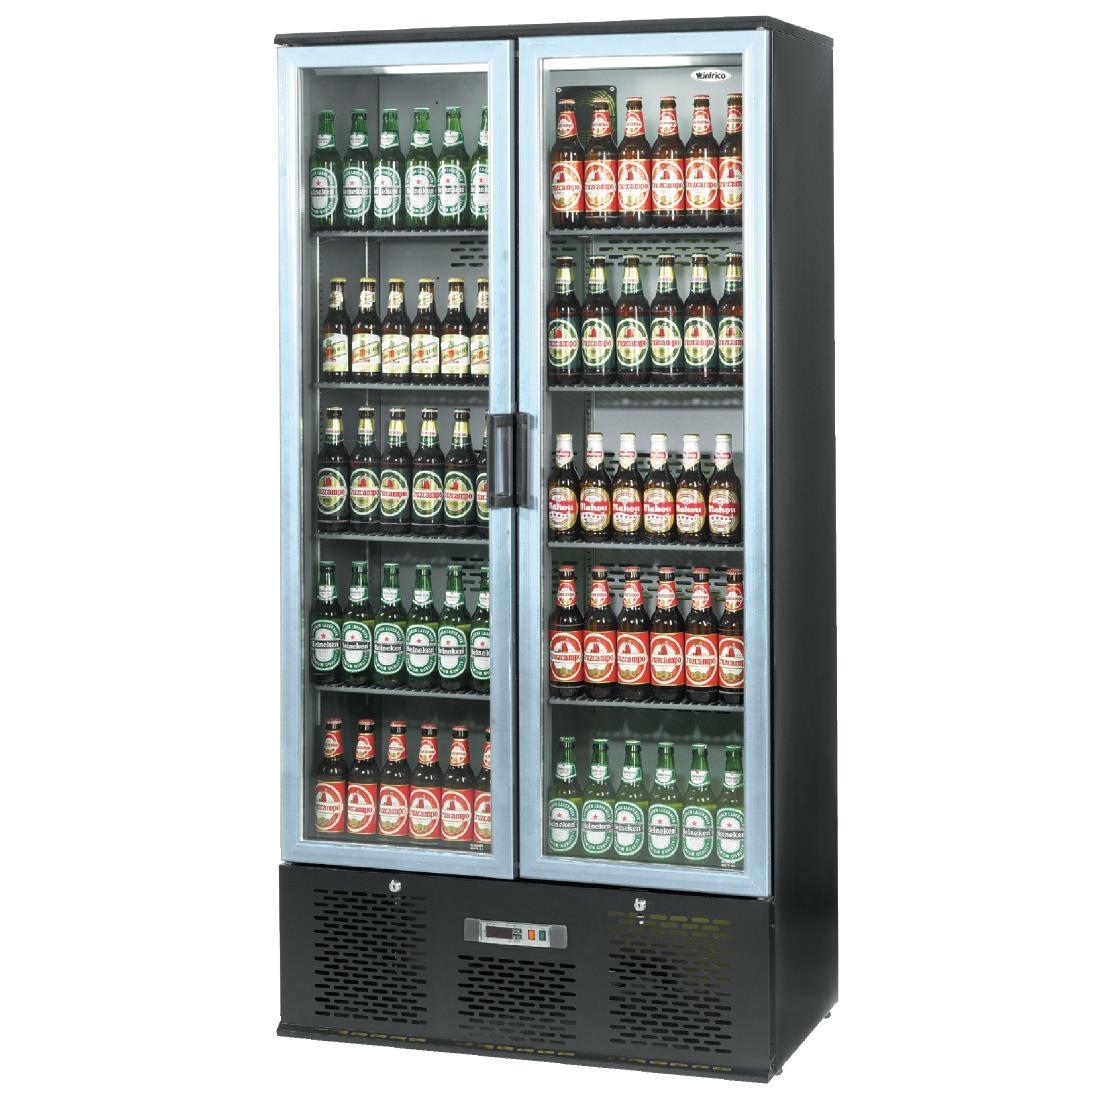 Infrico Upright Back Bar Cooler with Hinged Doors in Black and Steel ZXS20 - CC609  - 1